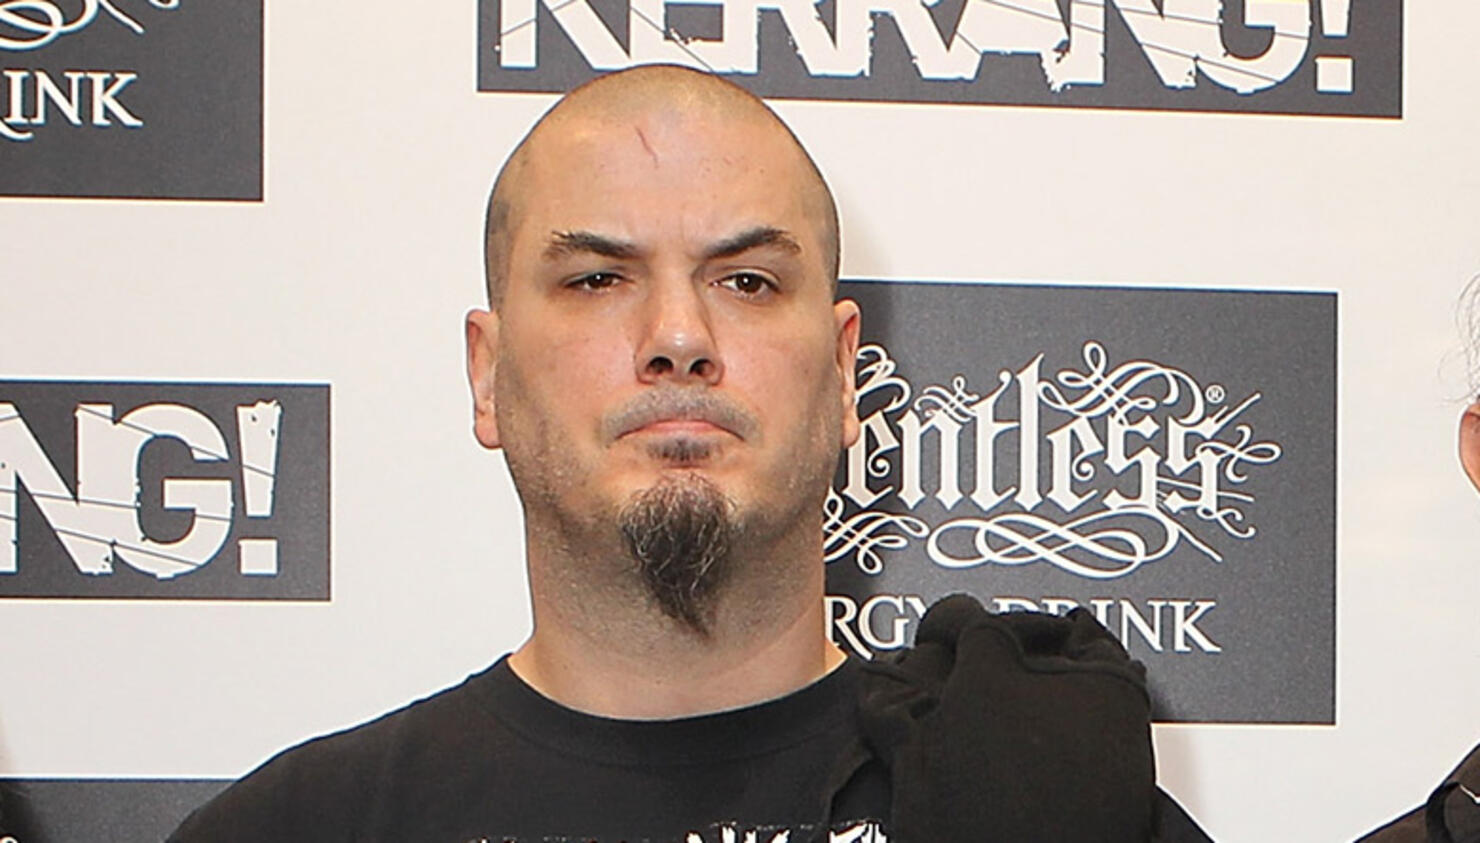 Philip Anselmo, Others Say Last Words to Vinnie Paul